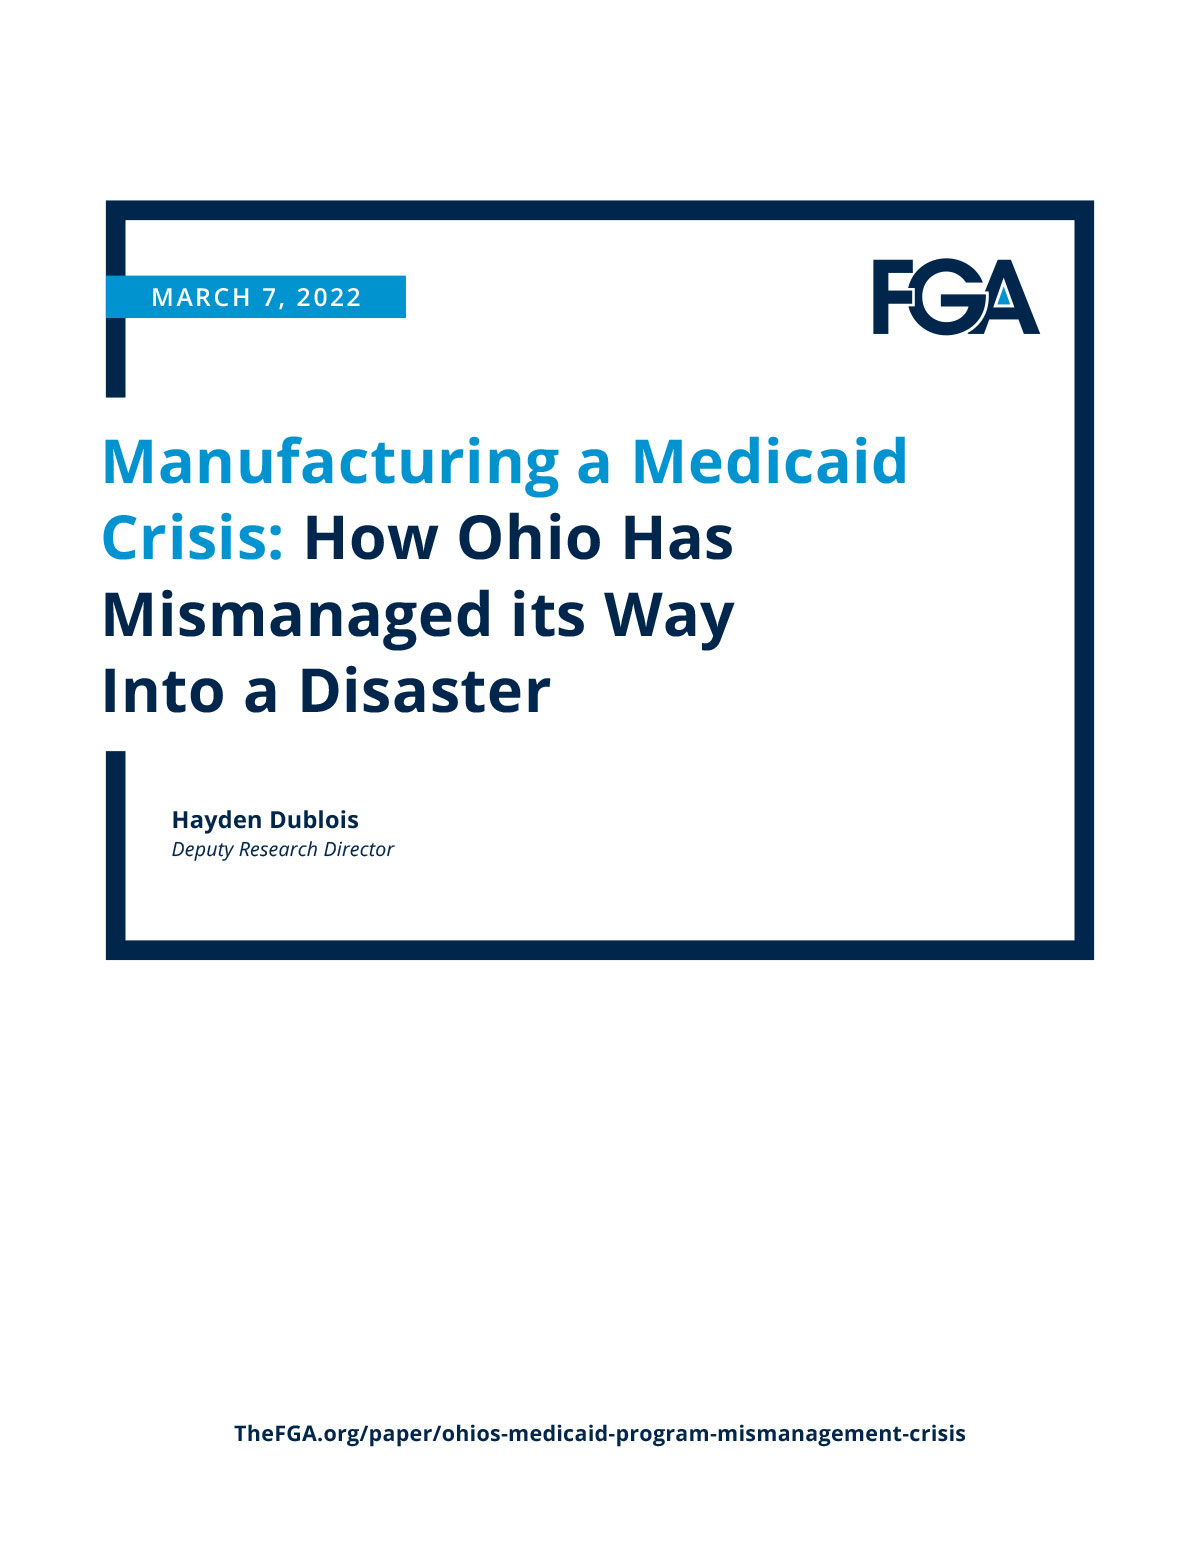 Manufacturing a Medicaid Crisis: How Ohio Mismanaged its Way into a Disaster